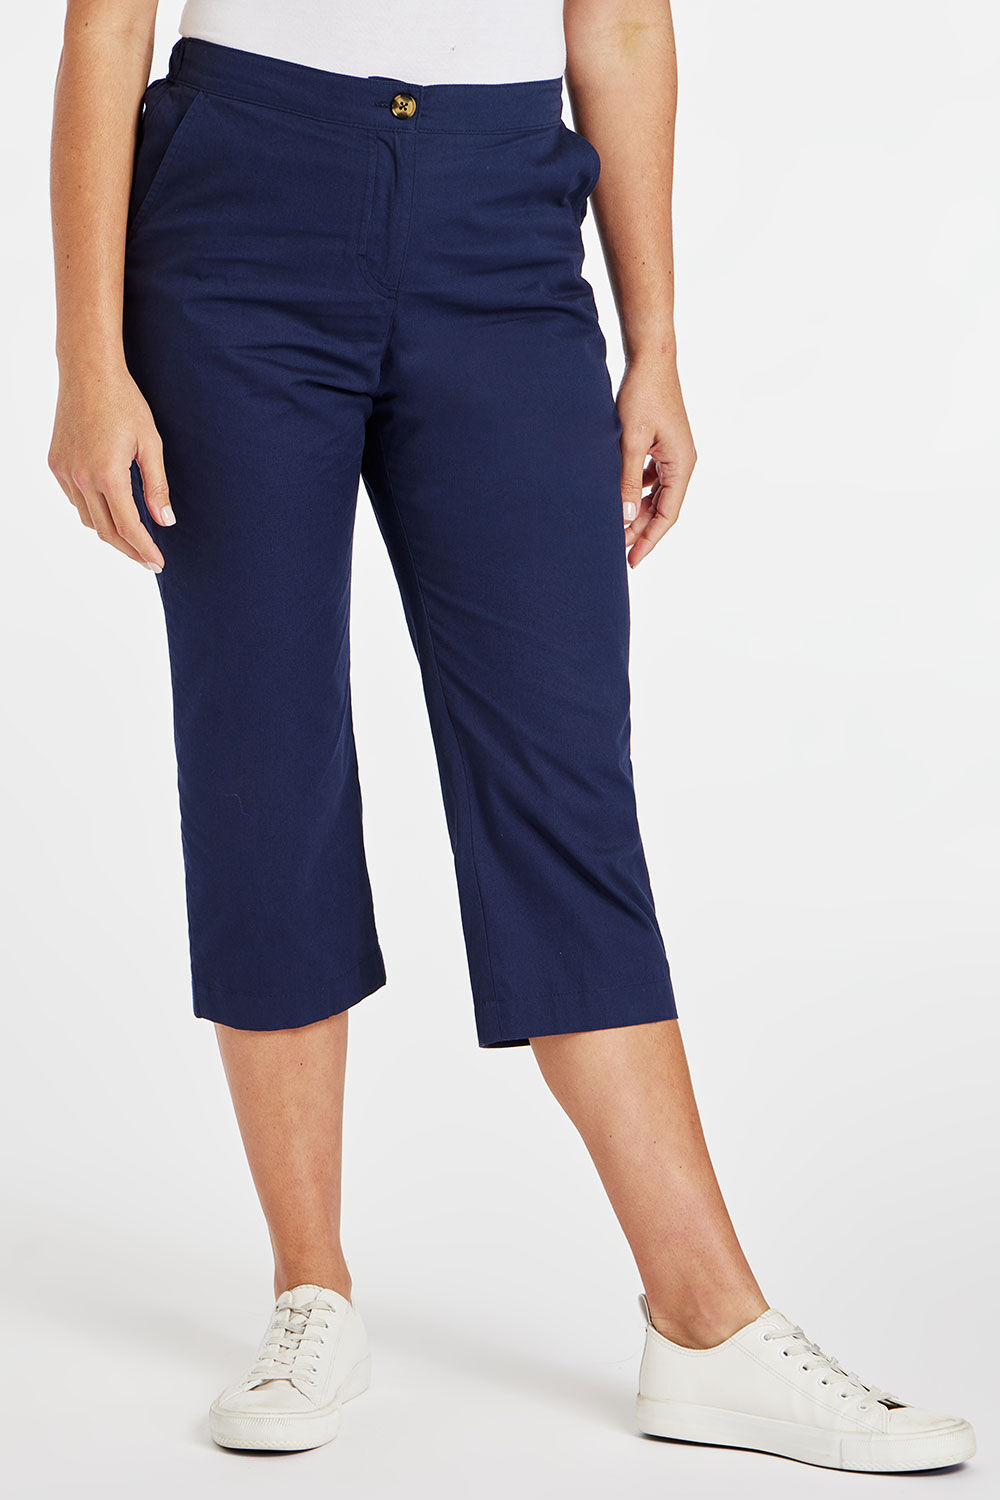 Bonmarche Navy Cropped Elasticated Trousers, Size: 16